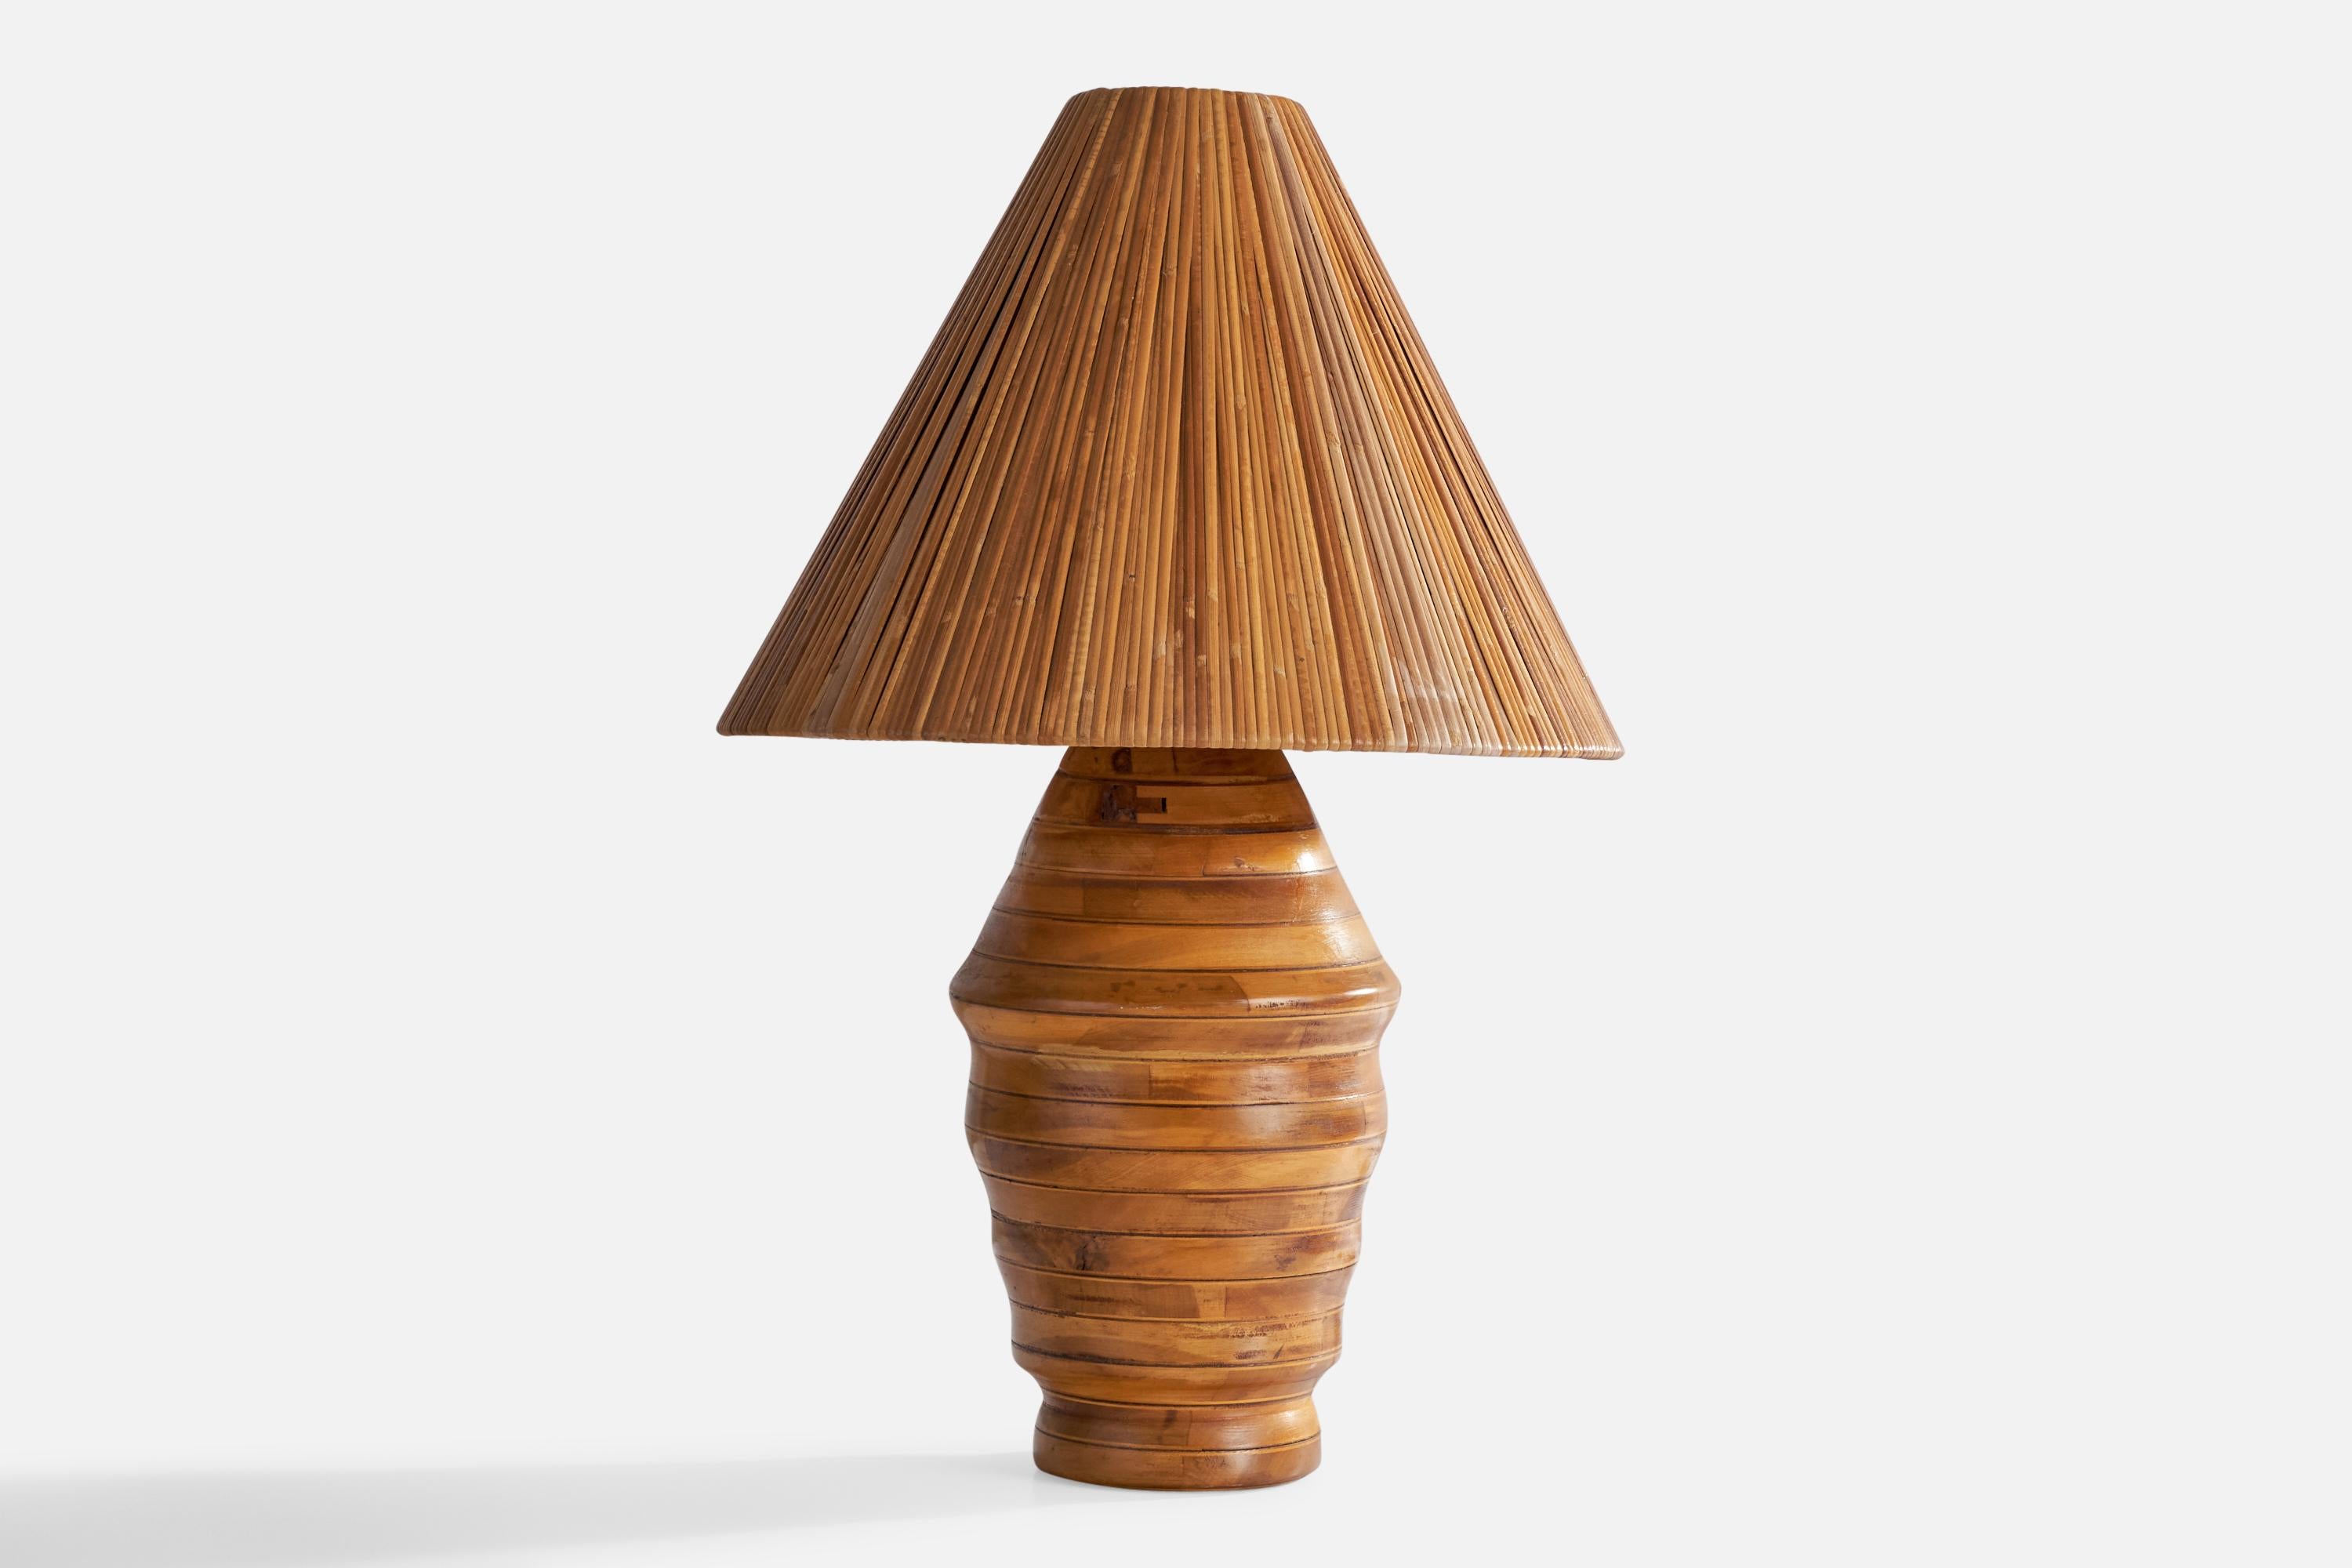 A hickory and rattan table lamp designed and produced in the US, 1950s.

Overall Dimensions (inches): 24.5” H x 16” D
Stated dimensions include shade.
Bulb Specifications: E-26 Bulb
Number of Sockets: 1
All lighting will be converted for US usage.